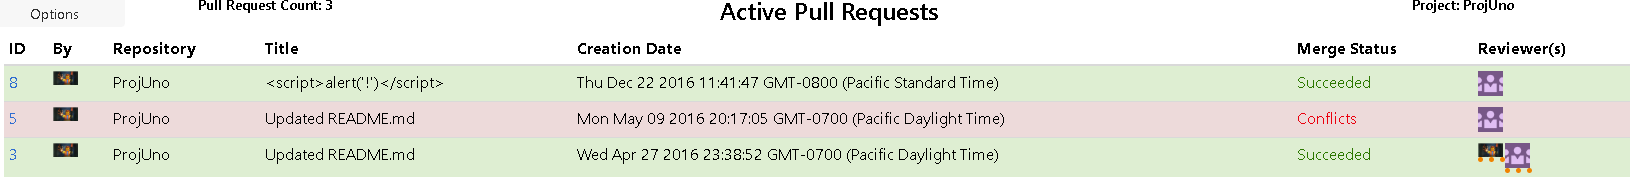 Screenshot of Active Pull Requests